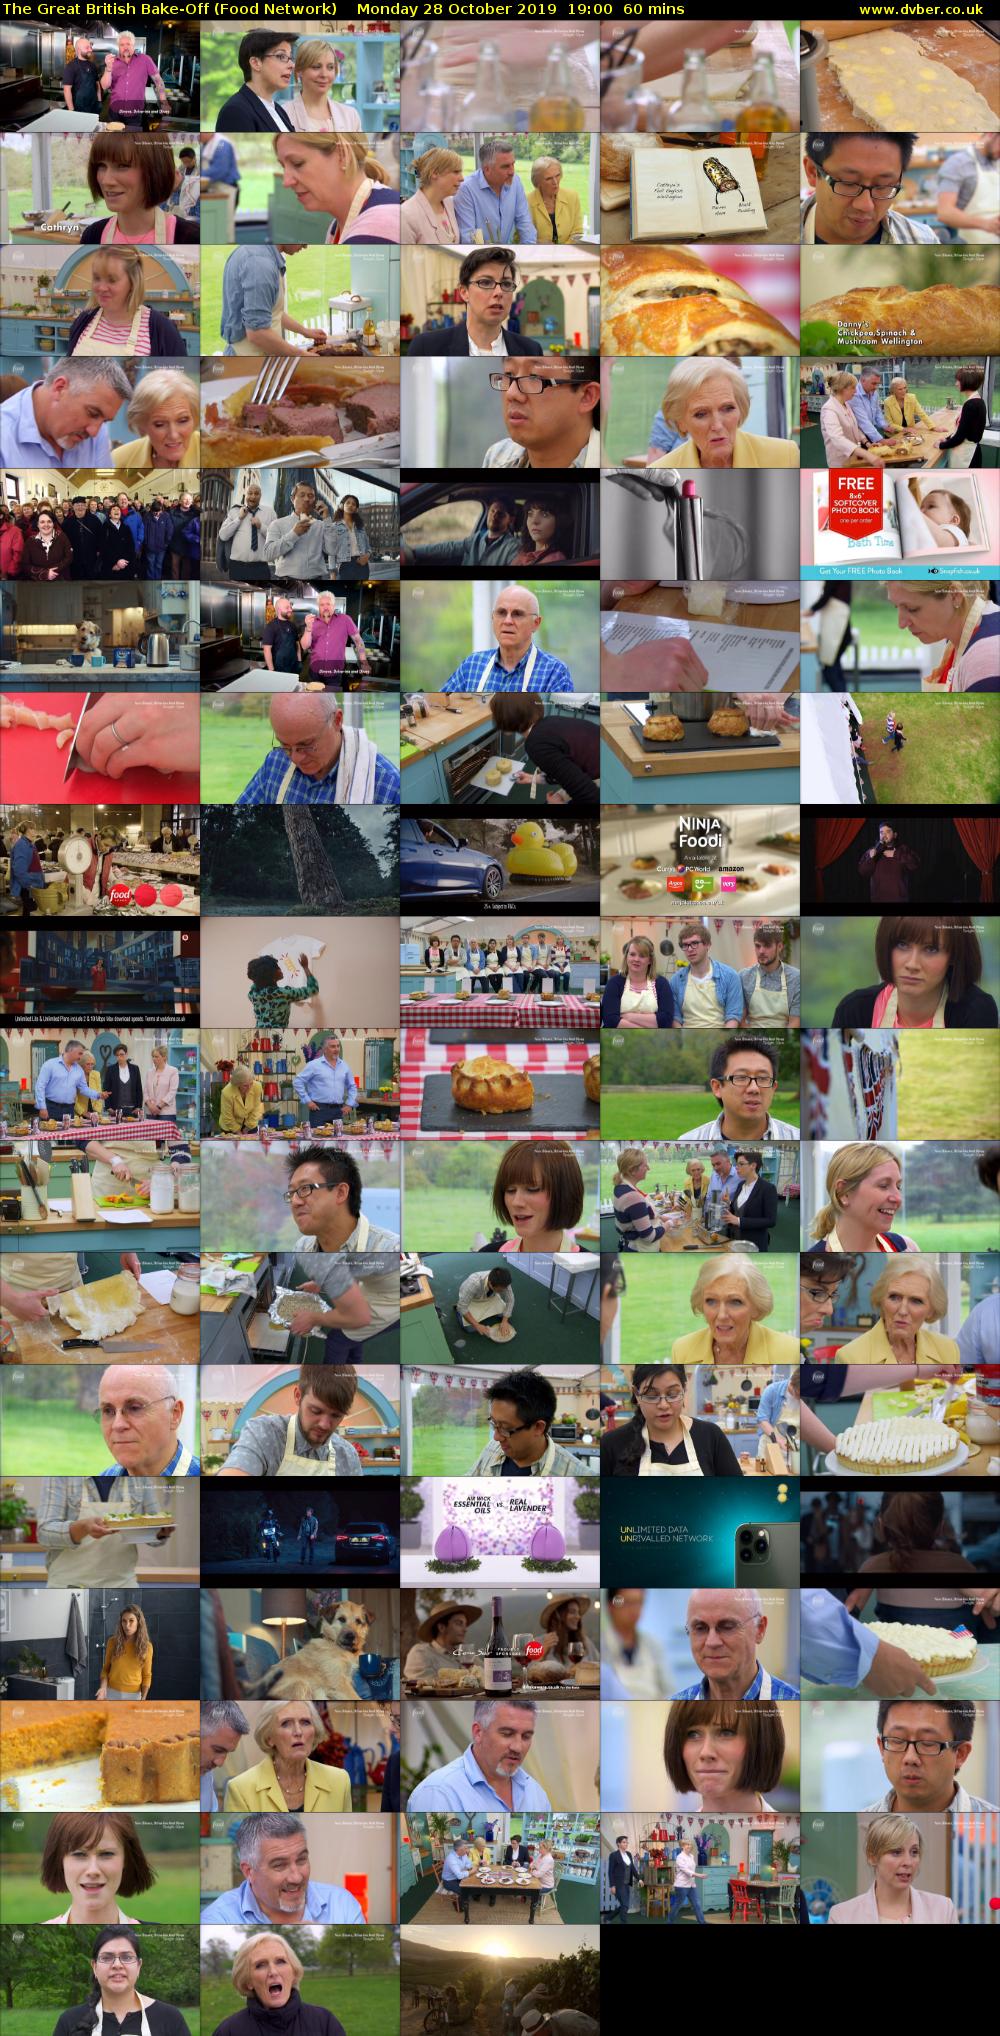 The Great British Bake-Off (Food Network) Monday 28 October 2019 19:00 - 20:00